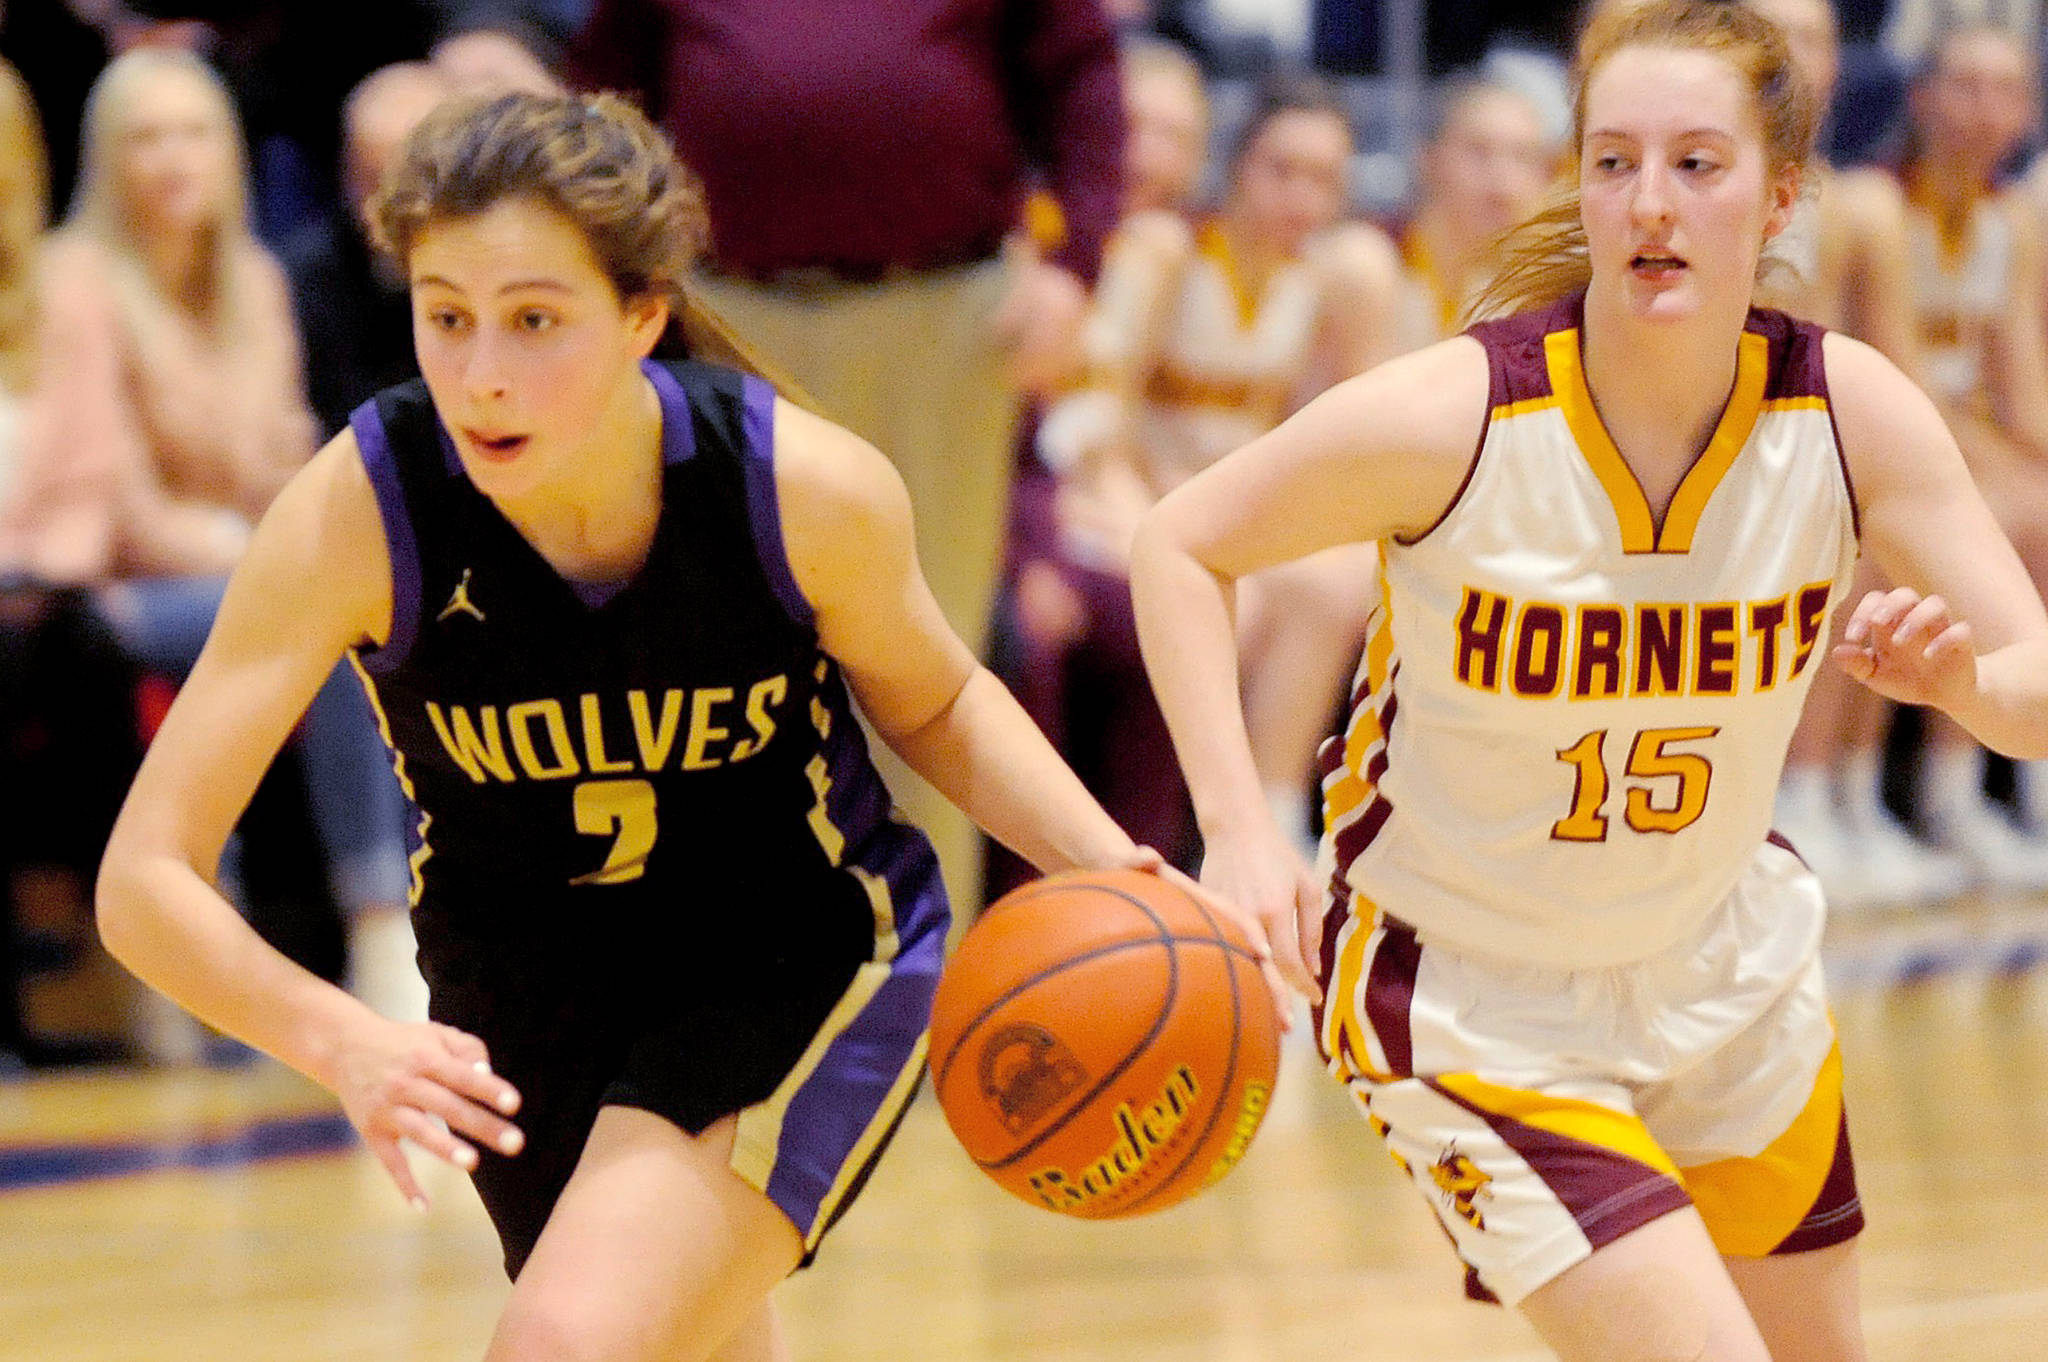 Sequim Wolves guard Jessica Dietzman (2) drives up the court with White River Hornets guard Kara Marecle (15) in close pursuit. Dietzman lead the Wolves in scoring with 14 points while Marecle had a game-high 22 as the Hornets beat the Wolves 57-53 in a district playoff loser-out game on Feb. 20 to qualify for the regional round of the 2A State Championships. Sequim Gazette photo by Conor Dowley